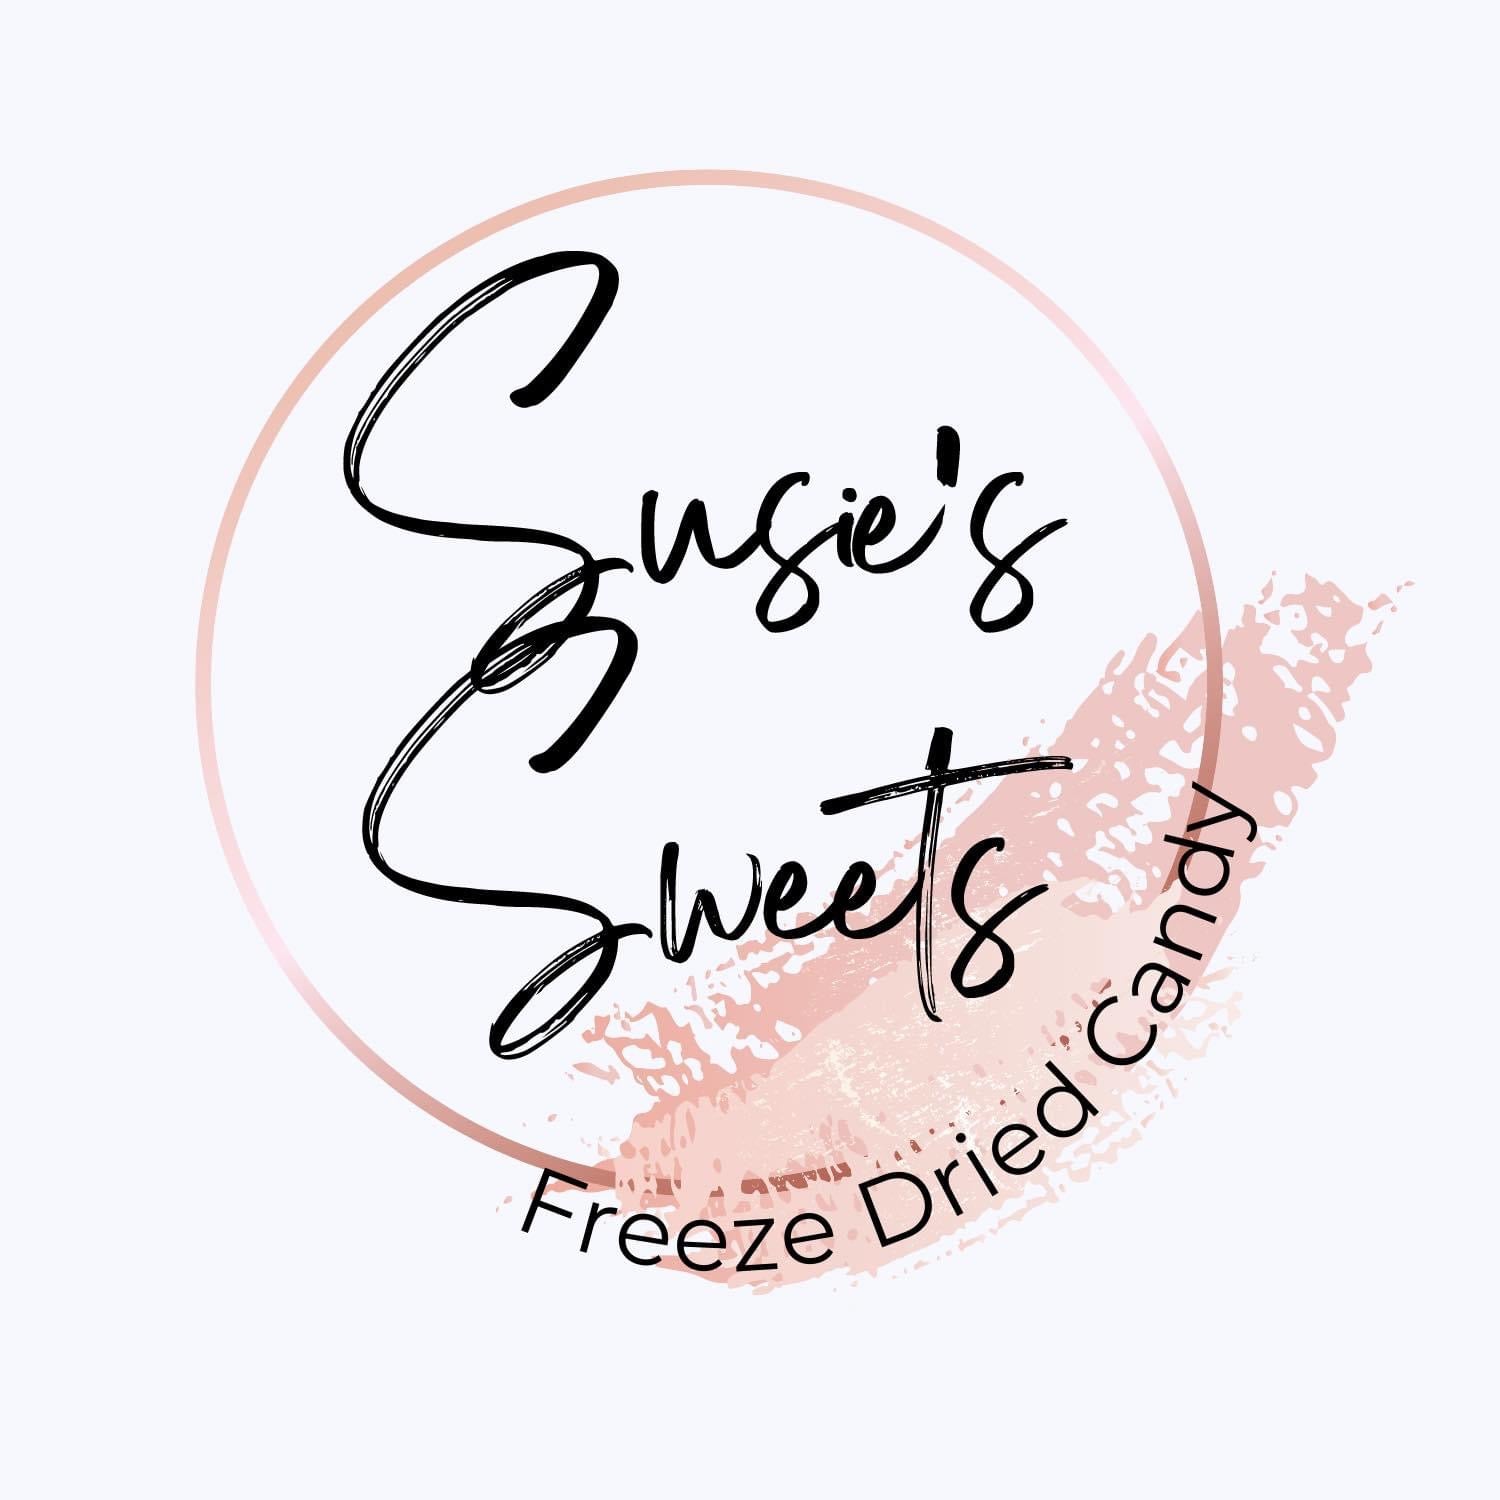 Susie’s Sweets